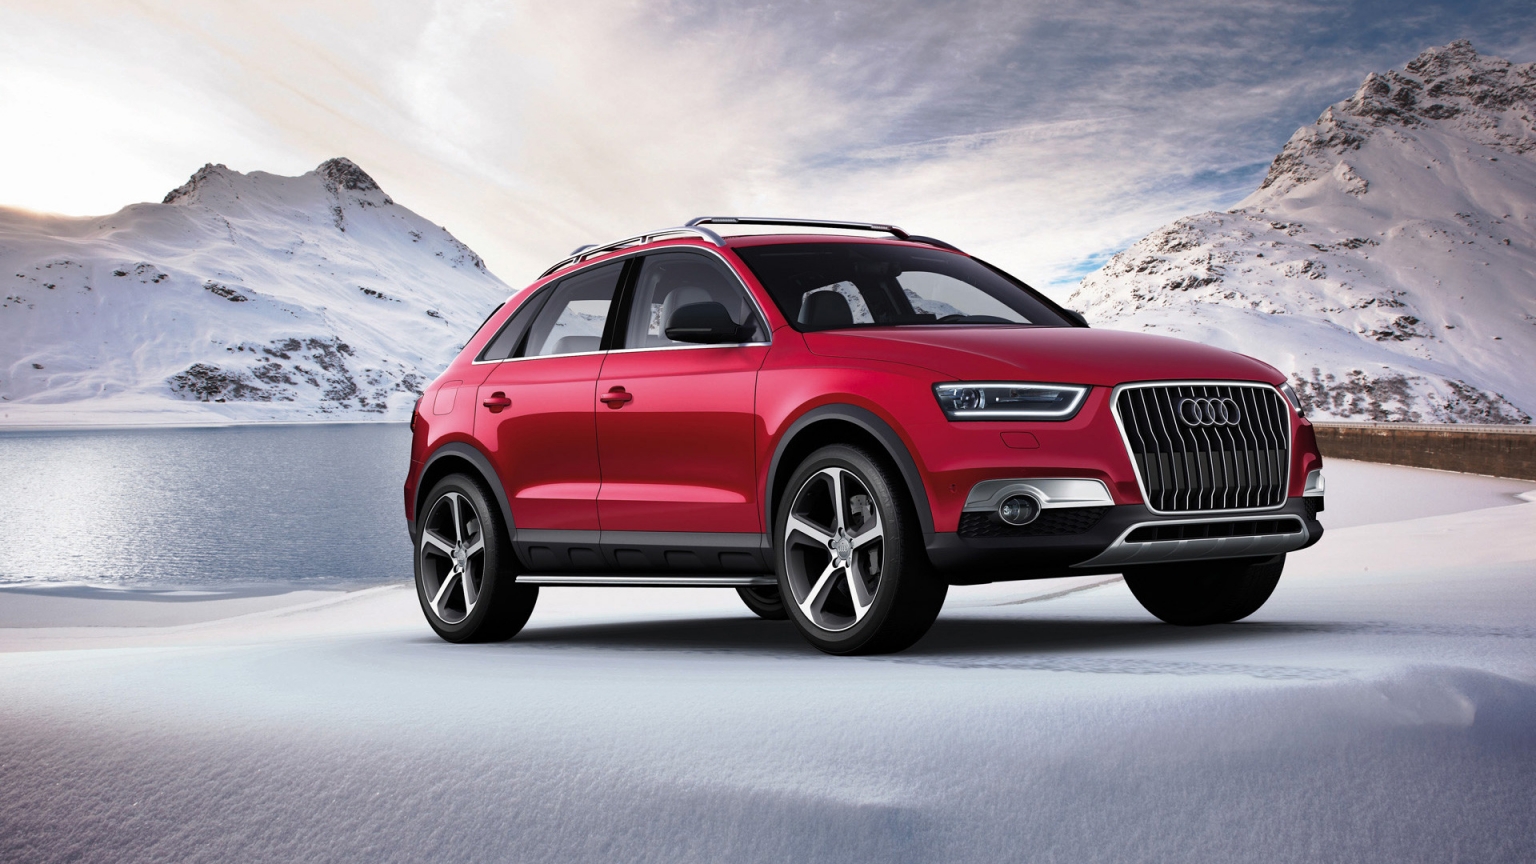 2012 Audi Q3 Vail for 1536 x 864 HDTV resolution